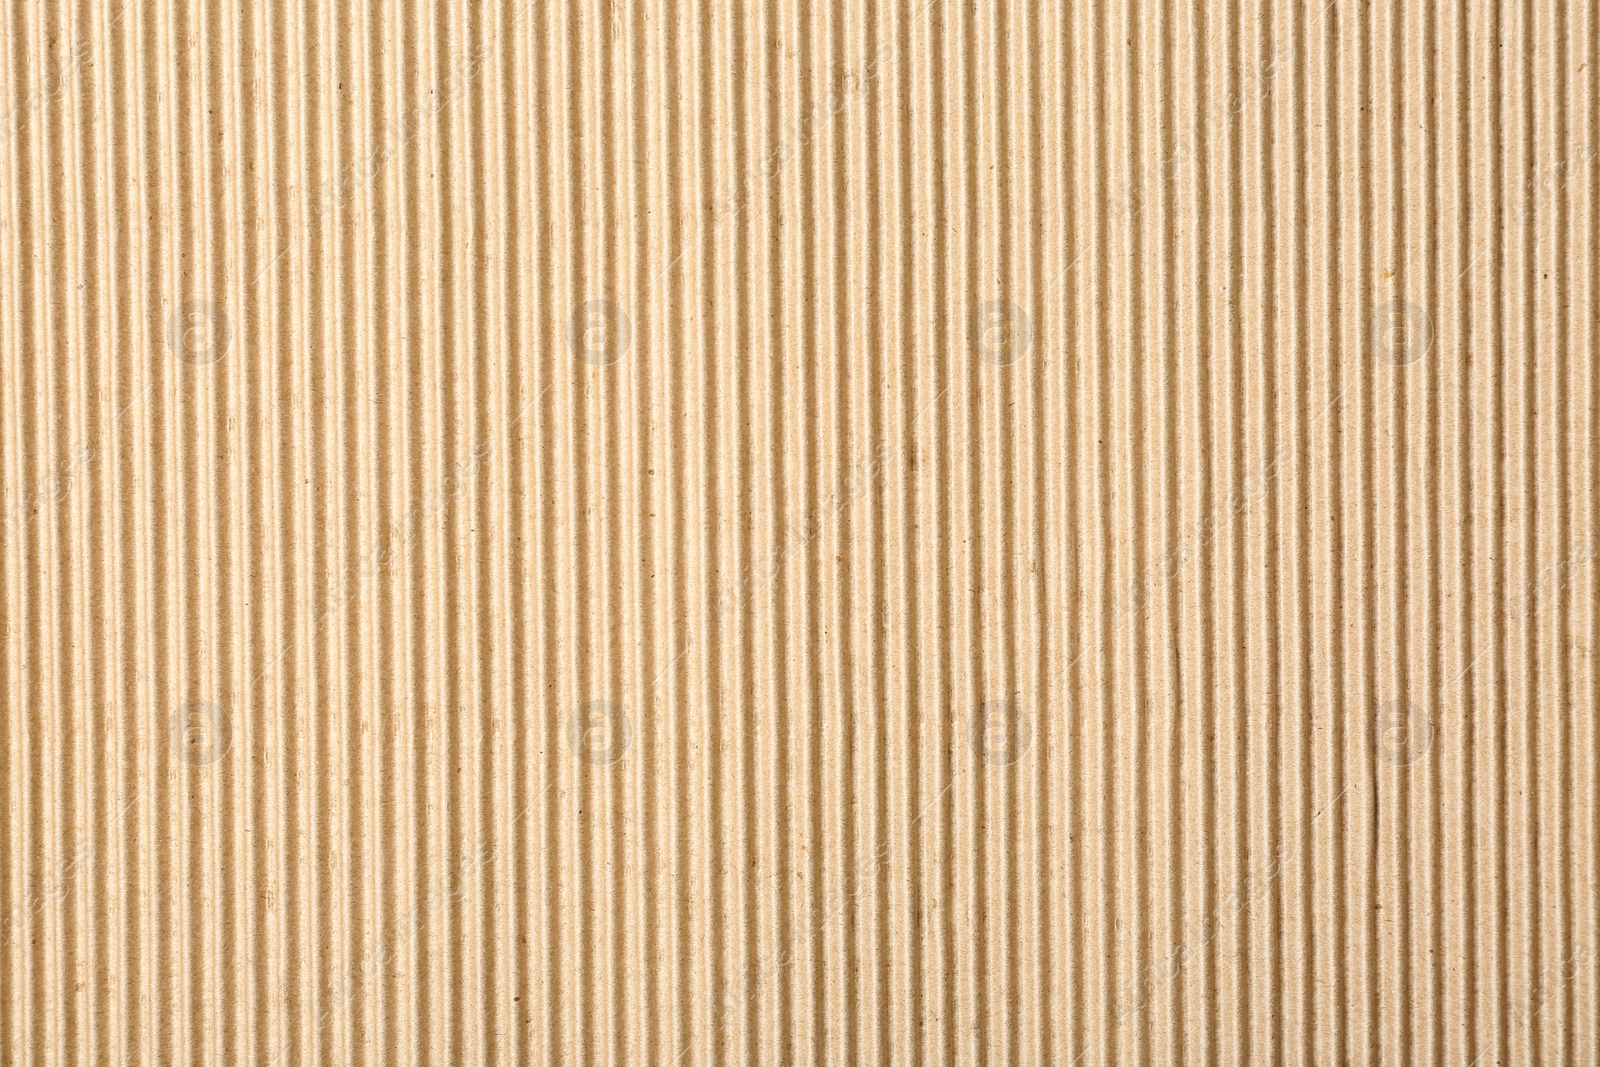 Photo of Corrugated cardboard surface as background, top view. Recyclable material